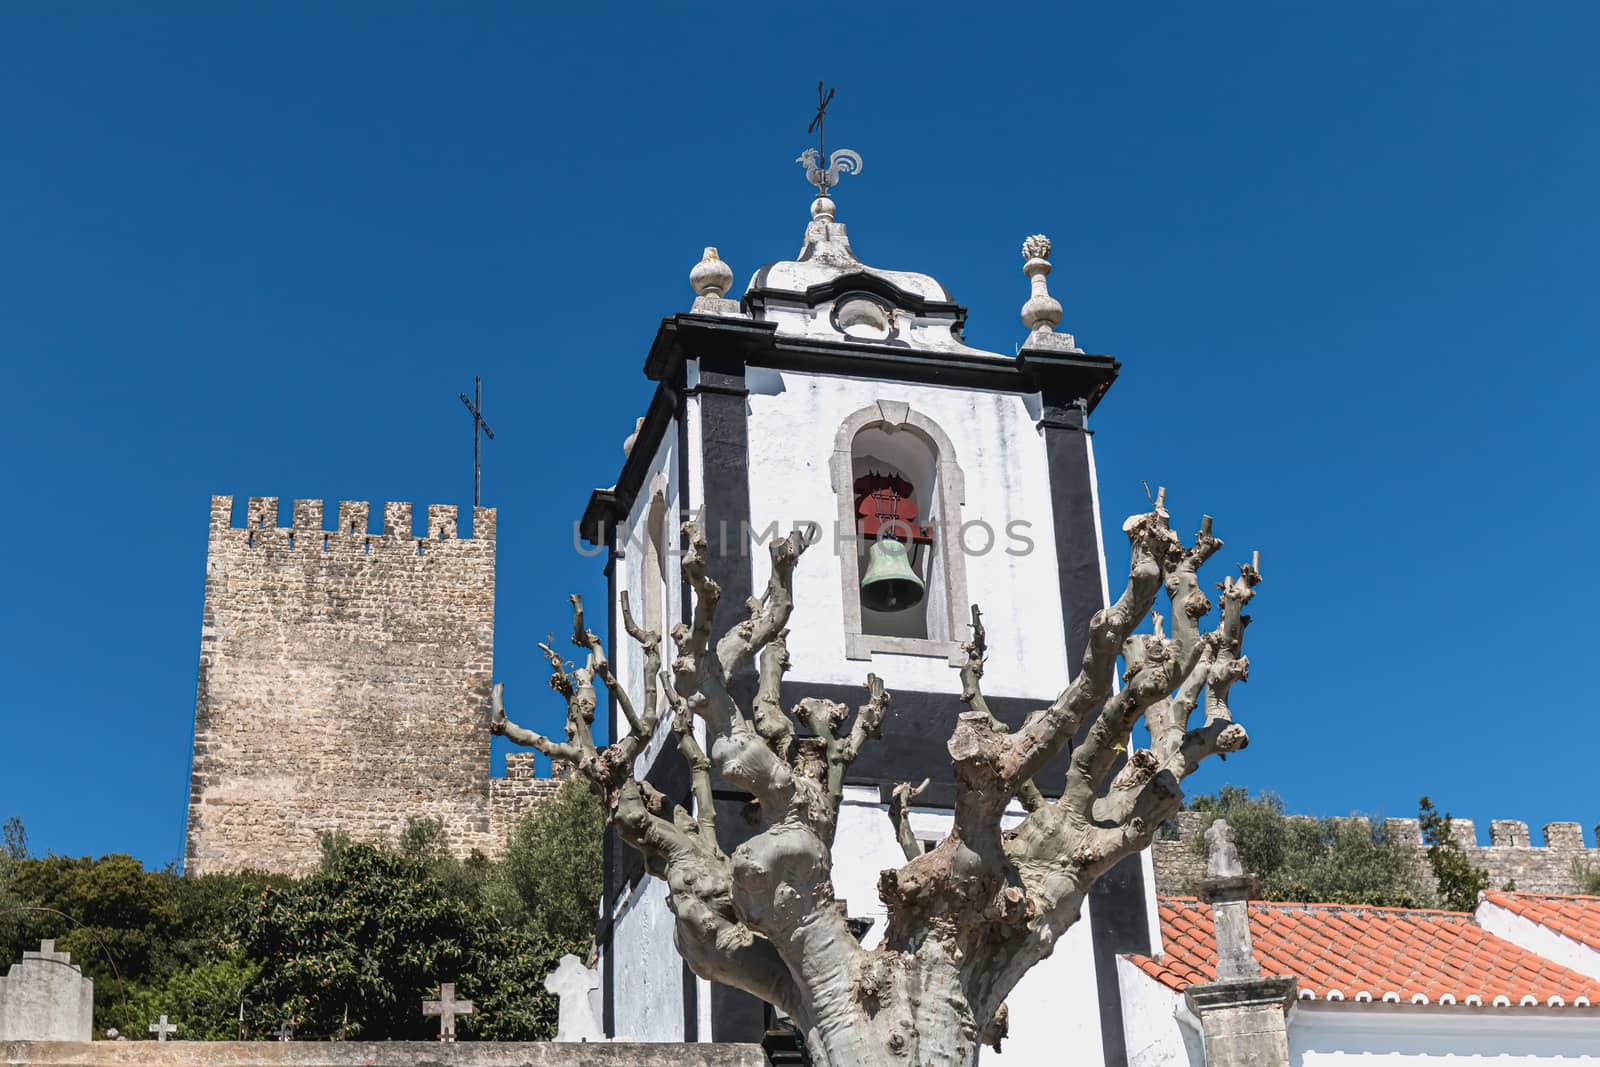 Obidos, Portugal - April 12, 2019: View of the entrance to the historic city with its typical architecture on a spring day